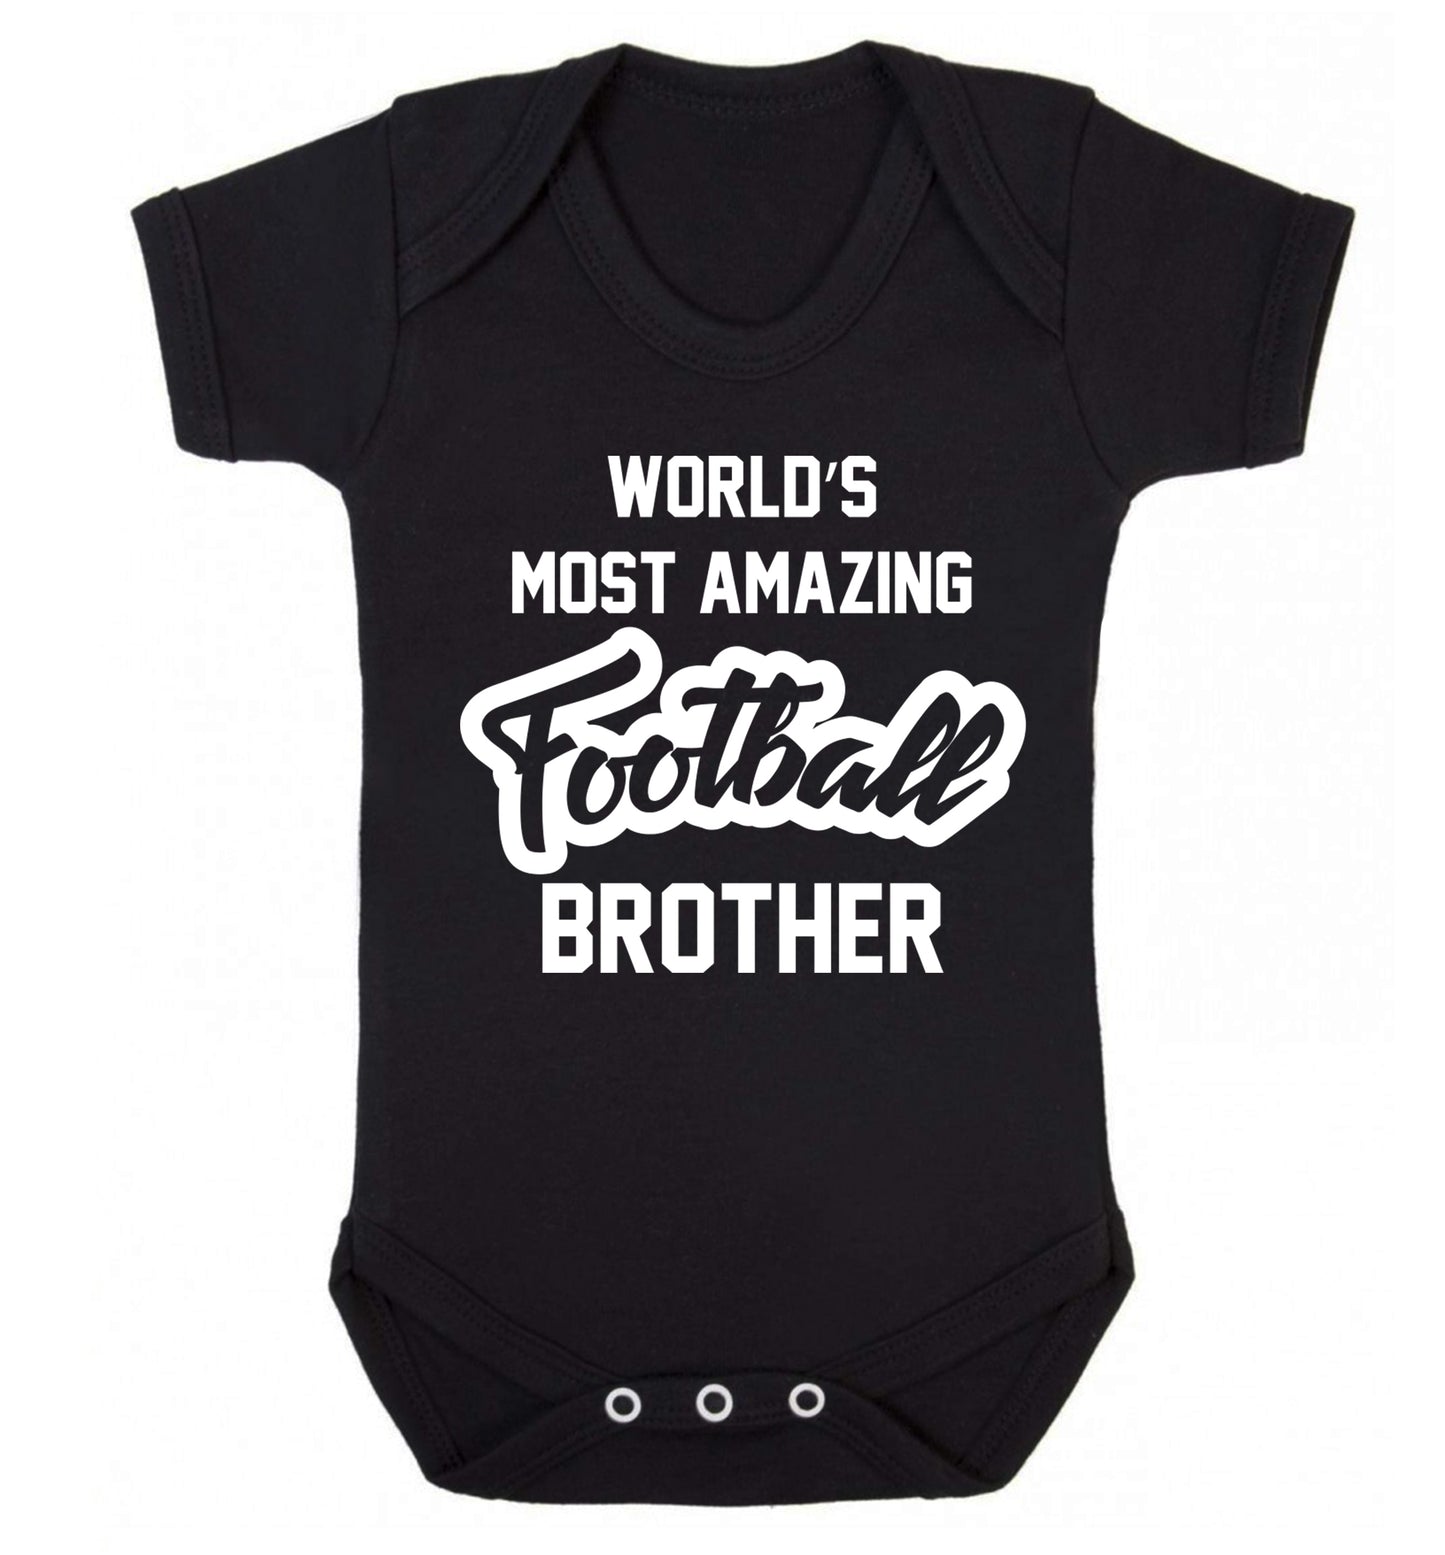 Worlds most amazing football brother Baby Vest black 18-24 months